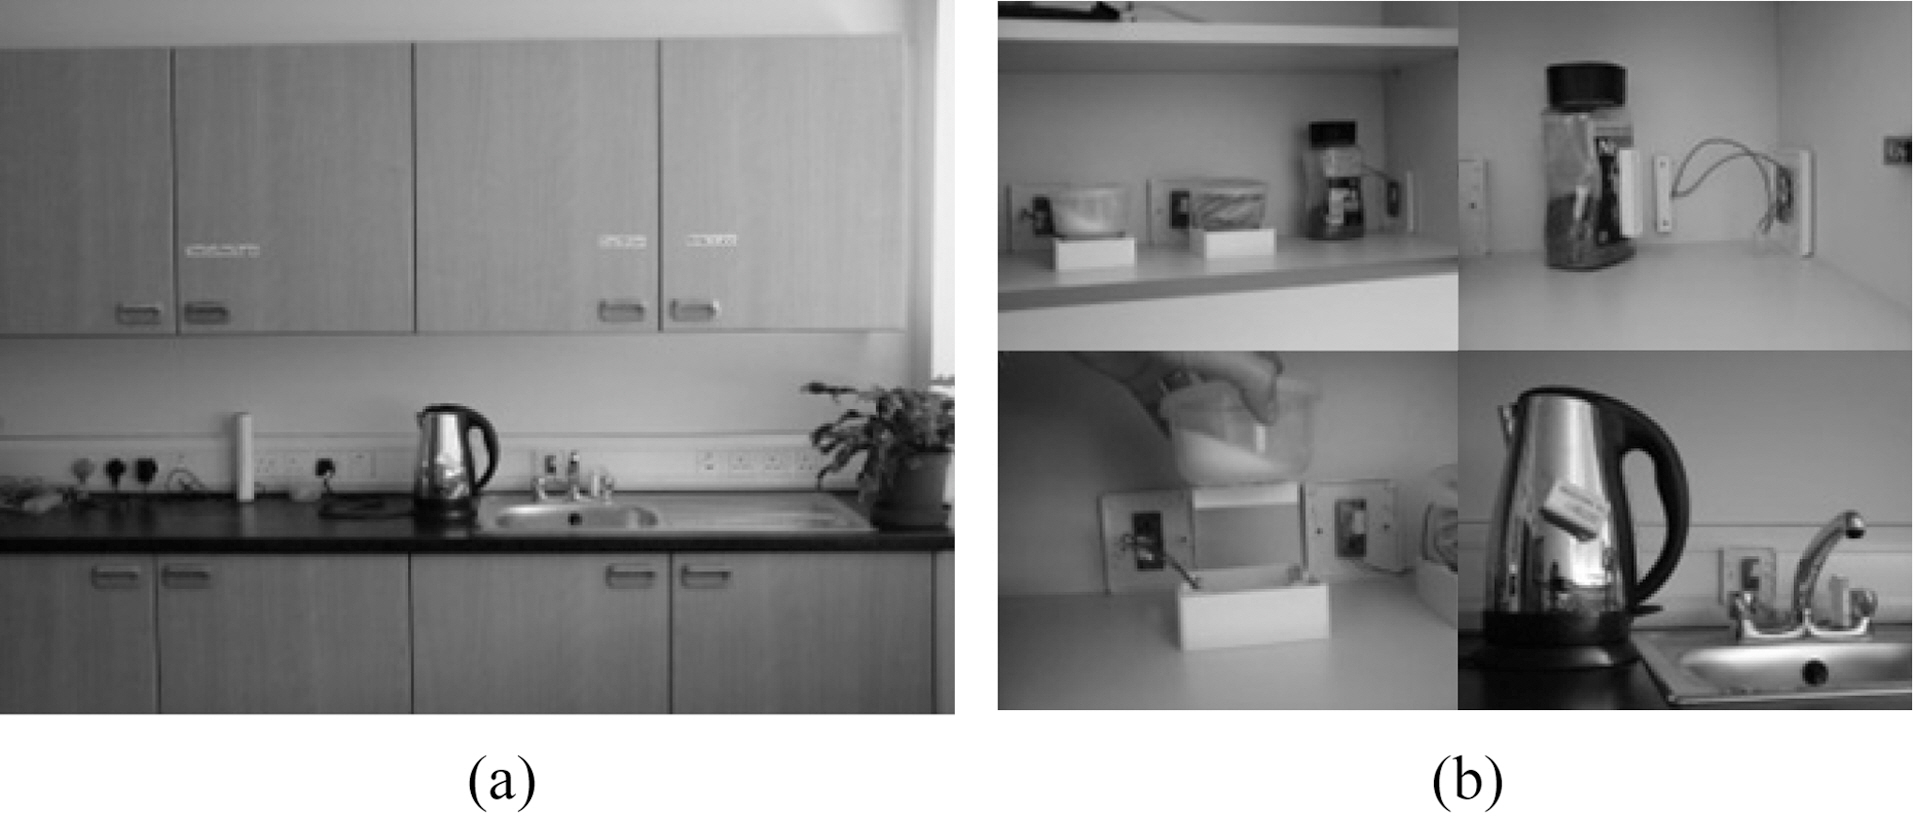 Experimental setup (a) Smart kitchen environment used forexperiments [18] and (b) examples of contact sensors connected tovarious objects within the kitchen.